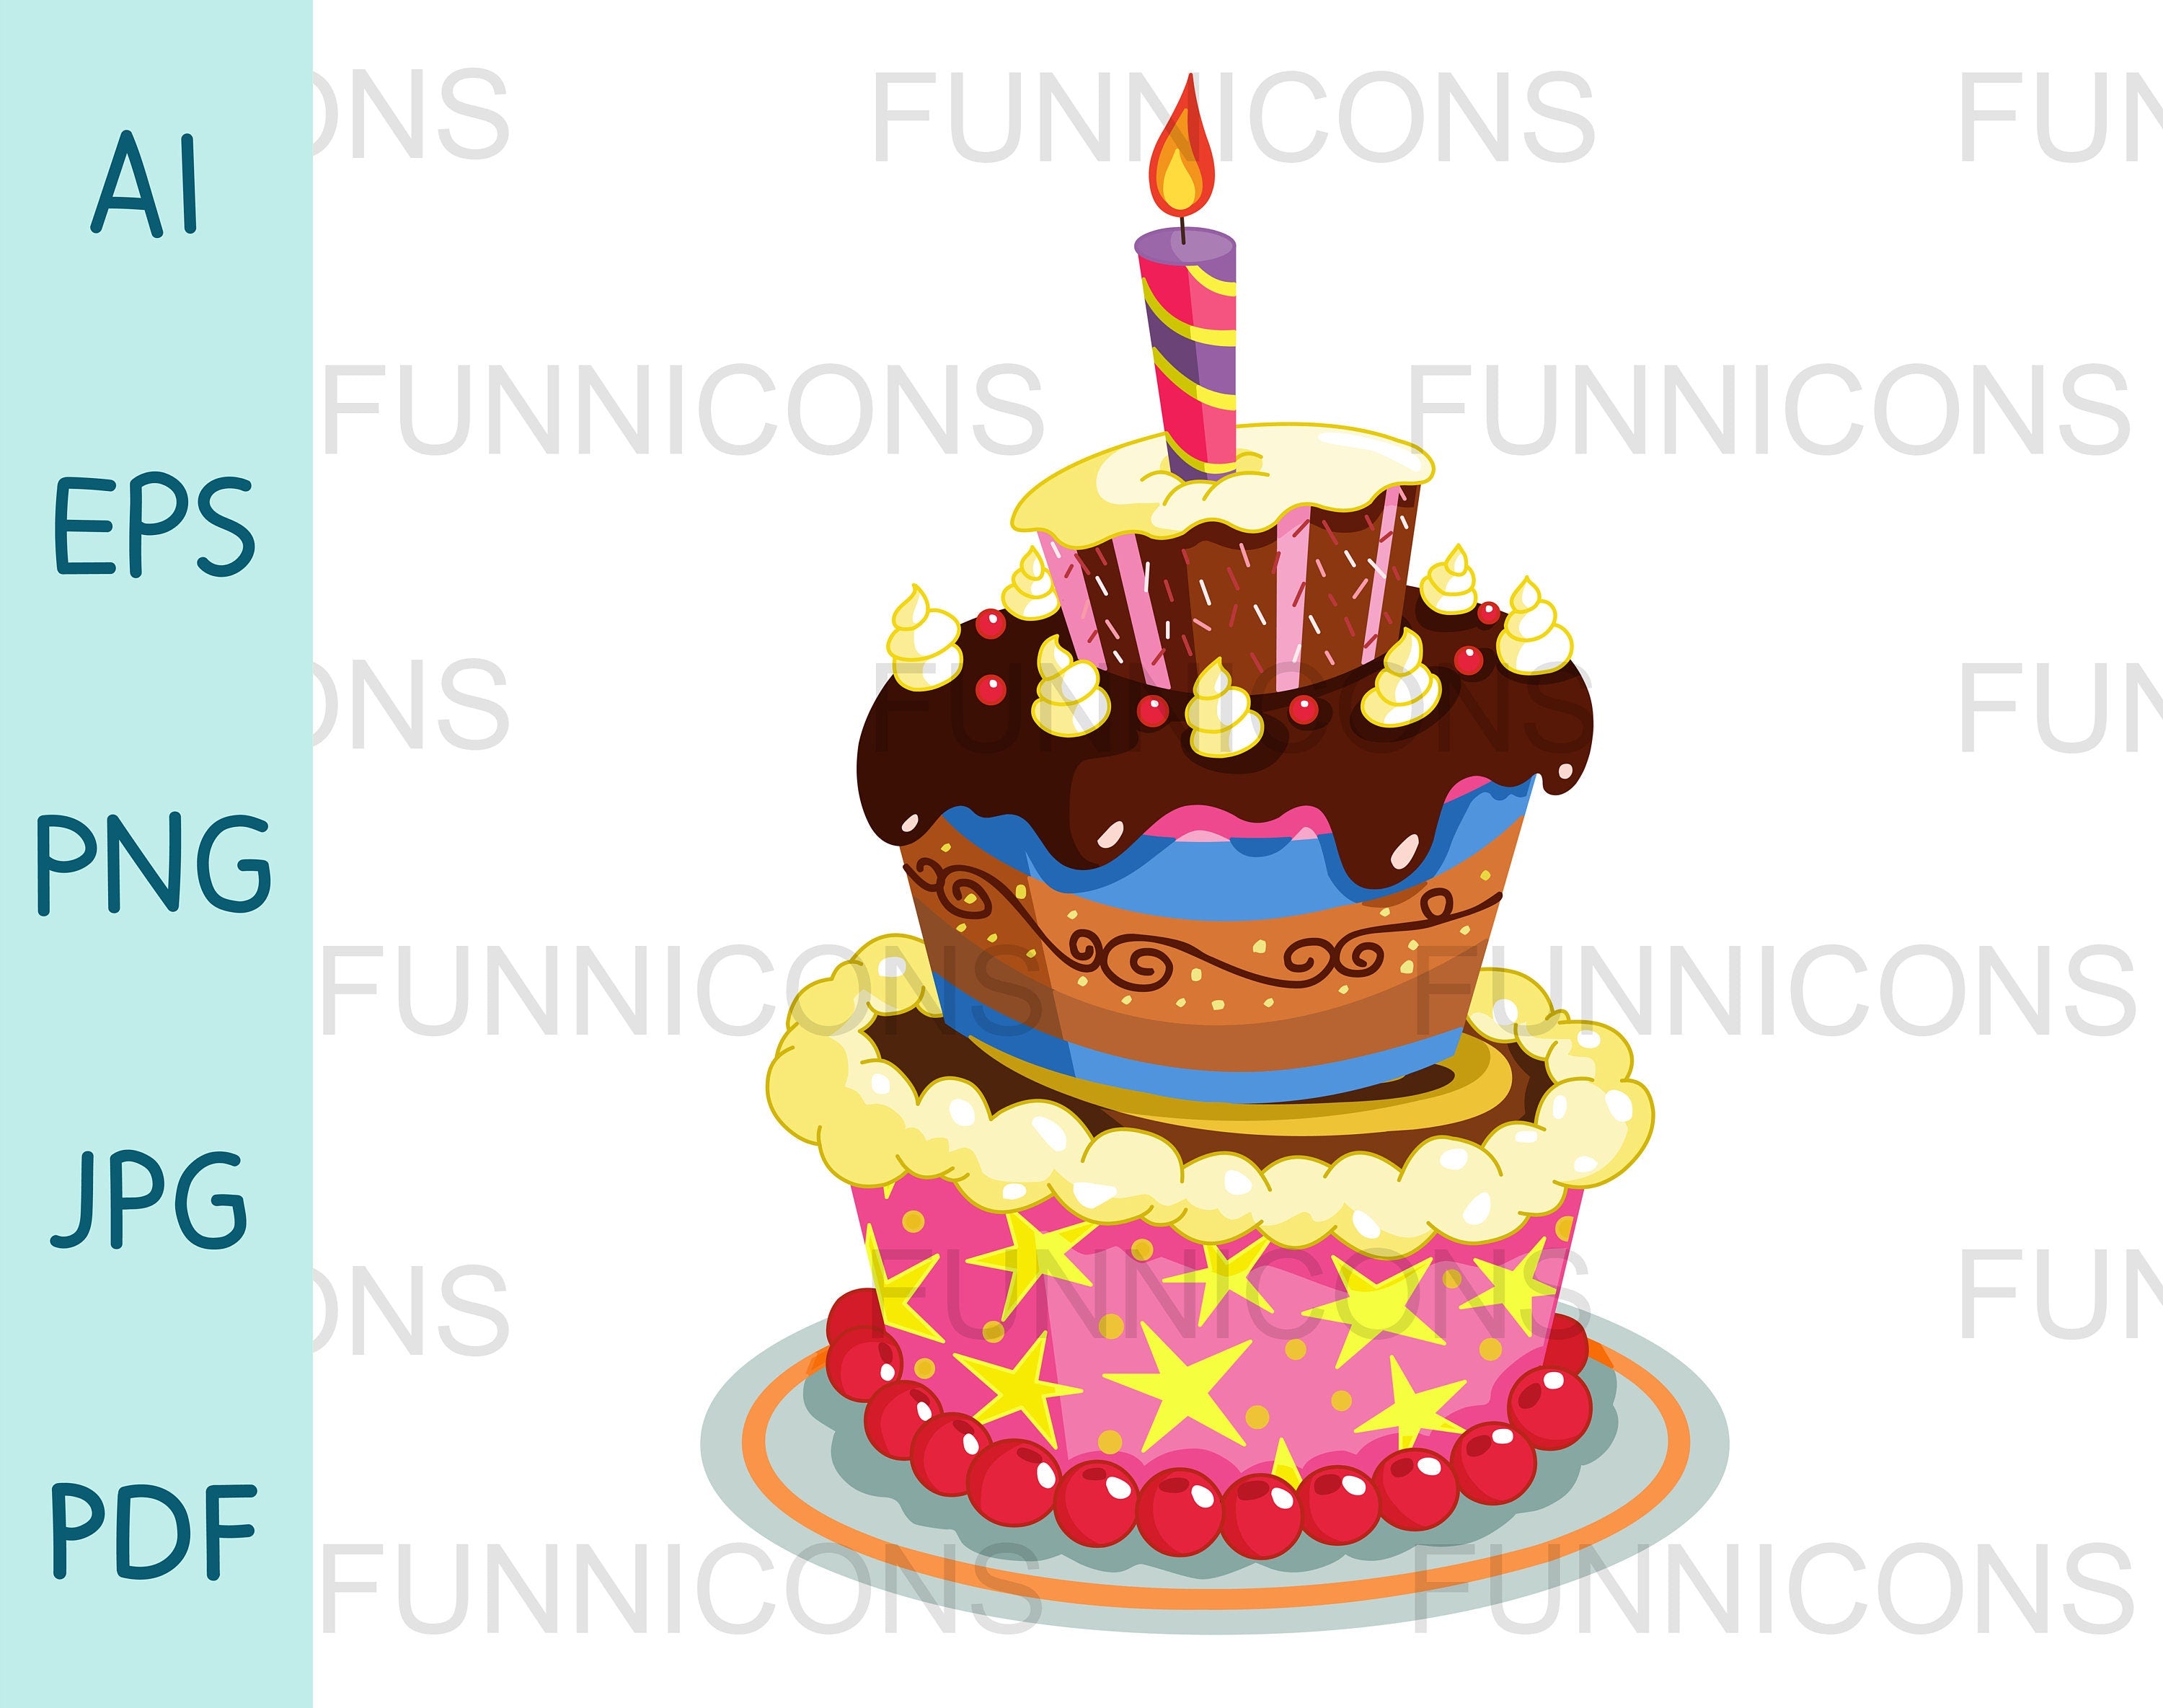 Elegant birthday cakes with candles Stock Photos - Page 1 : Masterfile